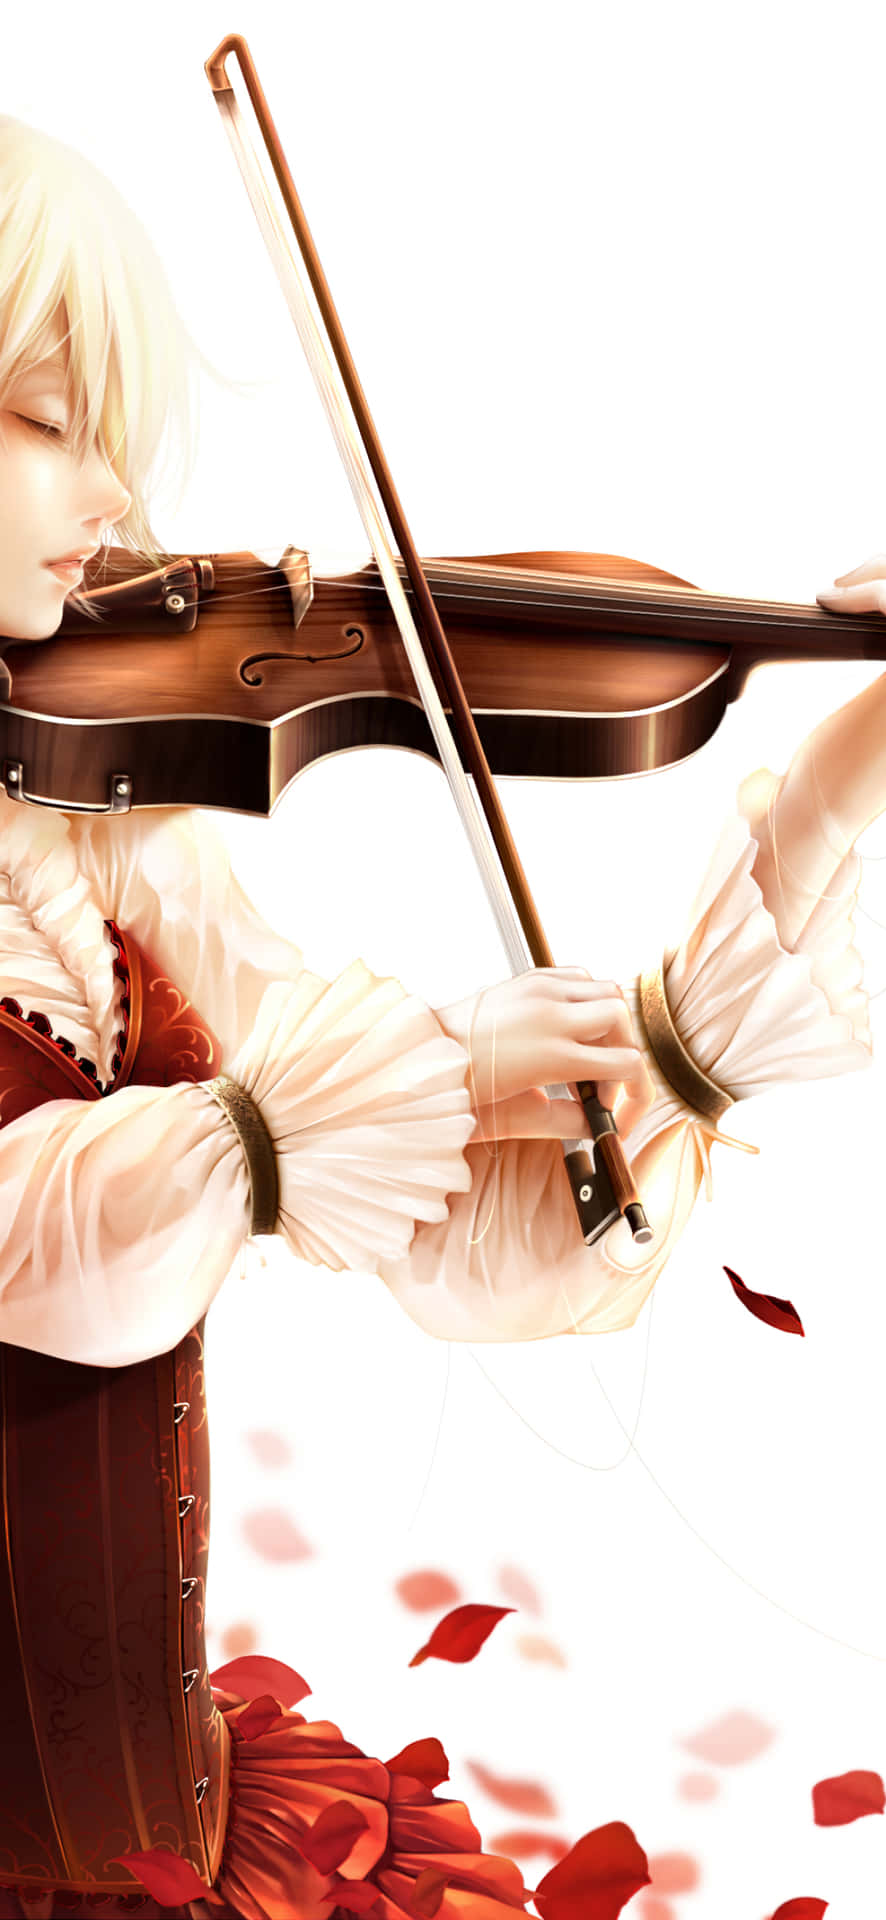 Anime Playing Violin With Rose Picture